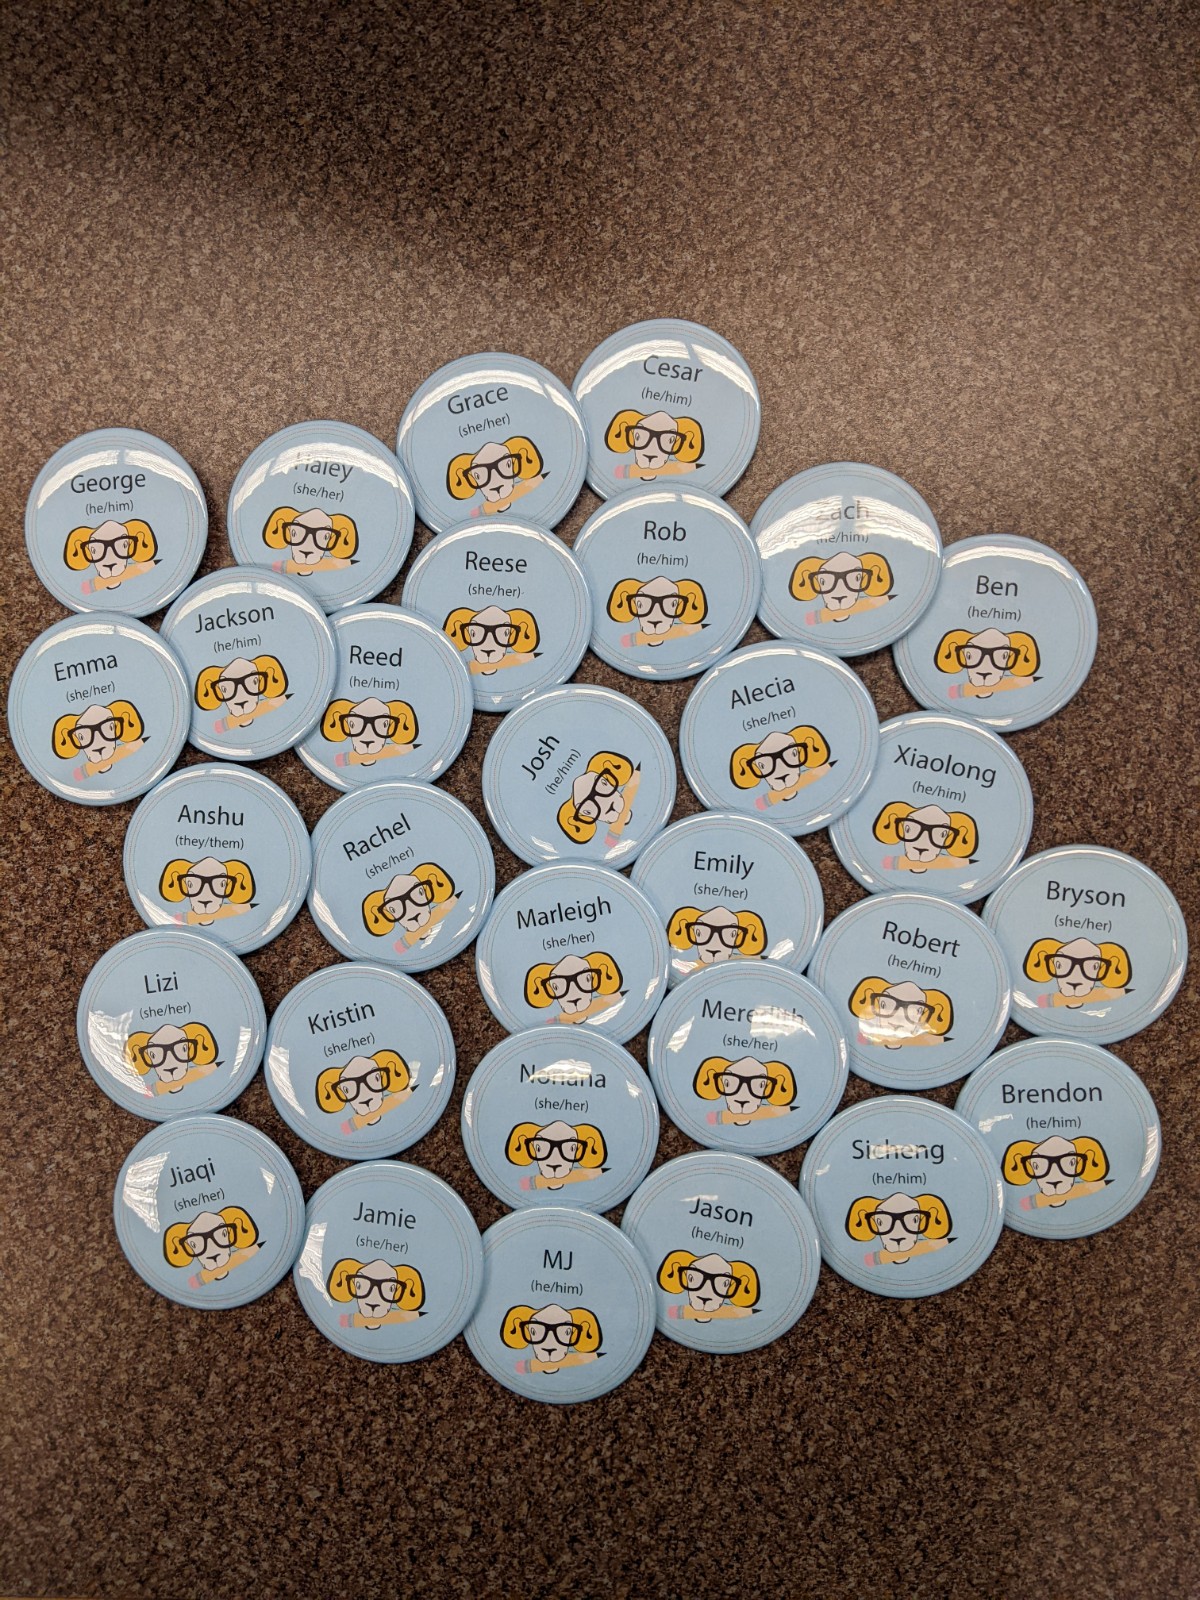 Approximatley two dozen small, circular pins scattered across a table. Each pin is carolina blue and depicts the learning center logo and the name of each peer tutor. 